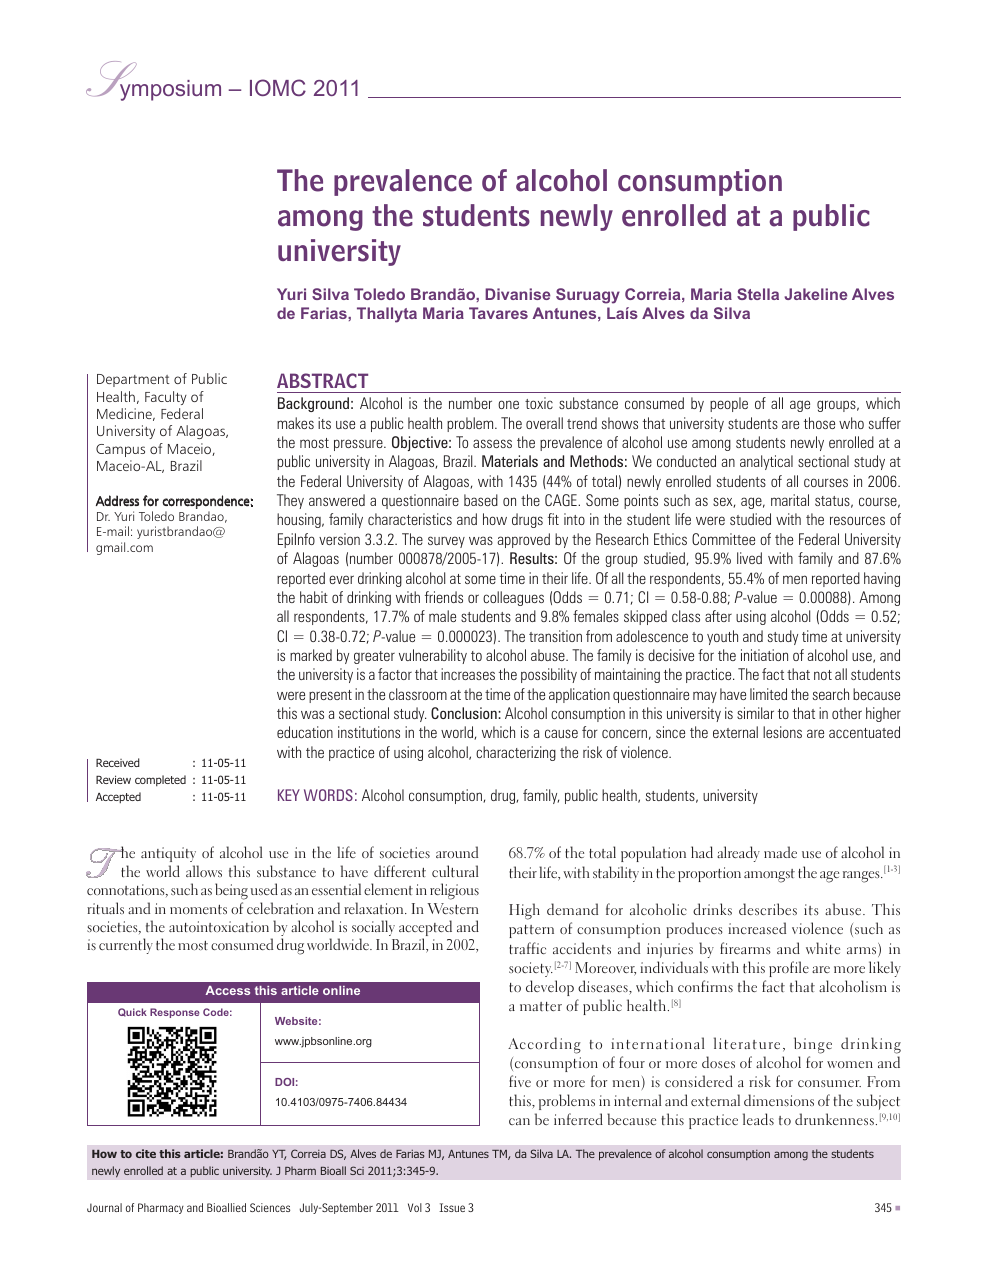 The Prevalence Of Alcohol Consumption Among The Students Newly Enrolled At A Public University Topic Of Research Paper In Clinical Medicine Download Scholarly Article Pdf And Read For Free On Cyberleninka